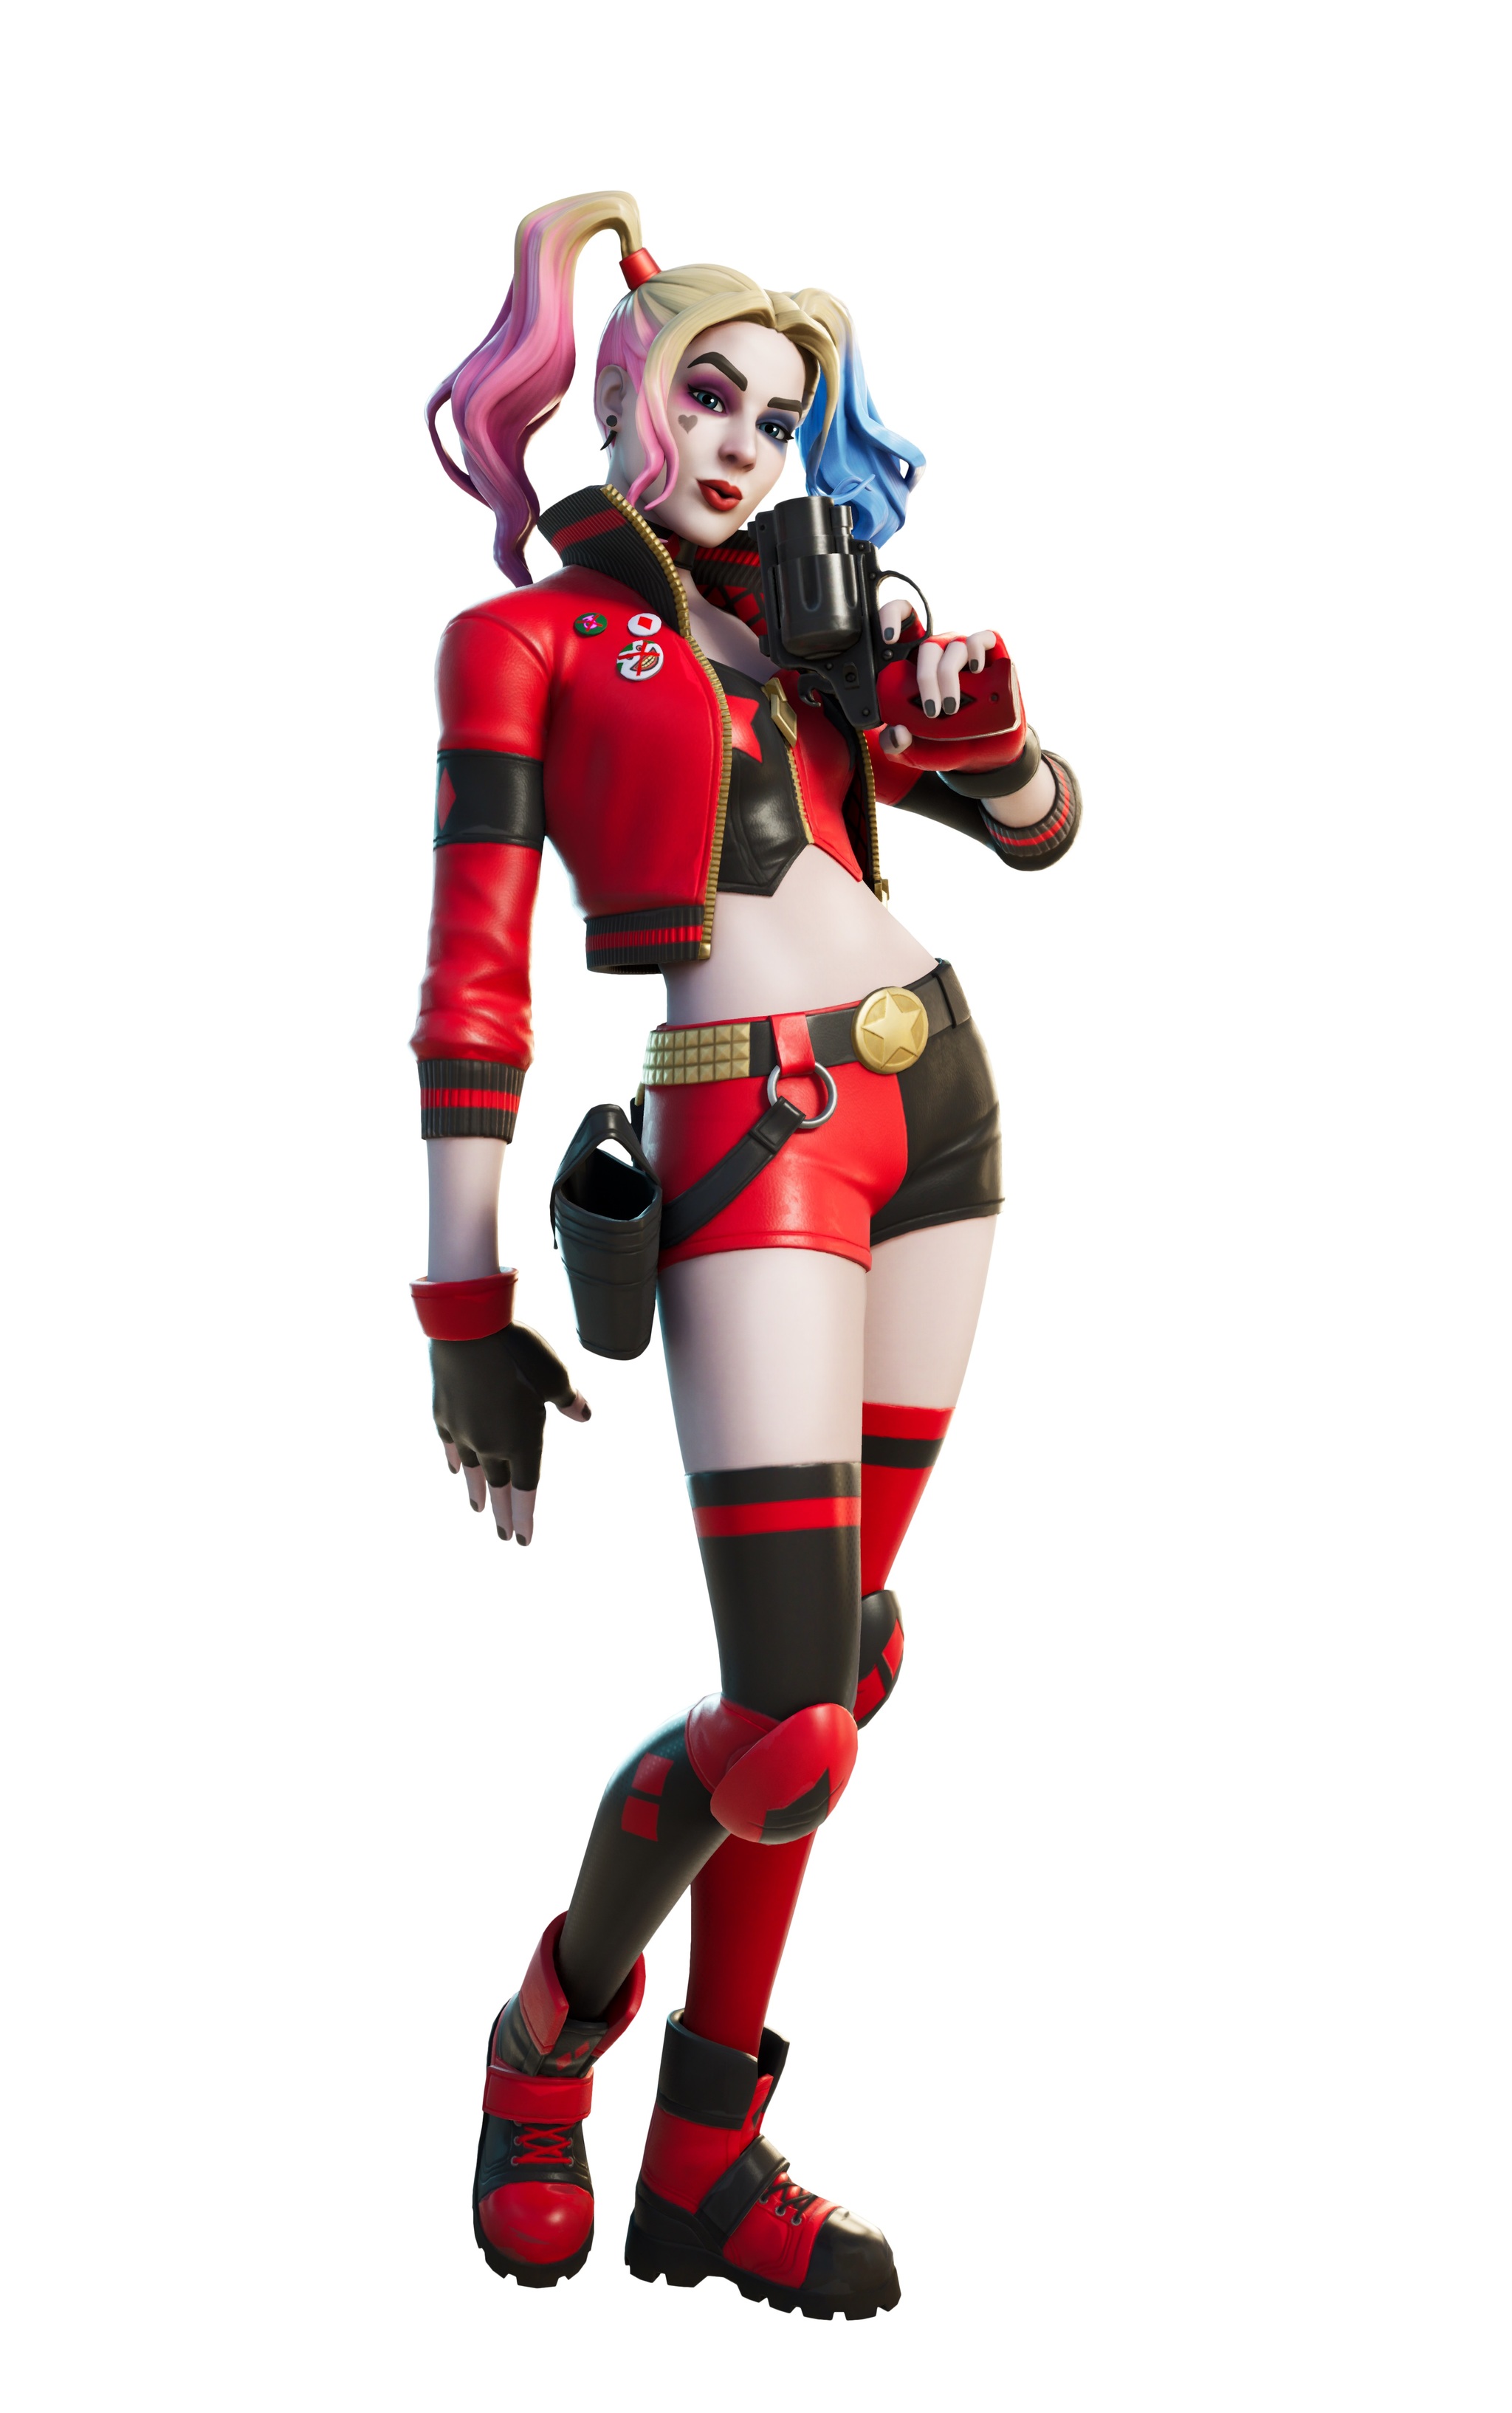 Fortnite harley quinn how to connect macbook pro to apple tv without airplay